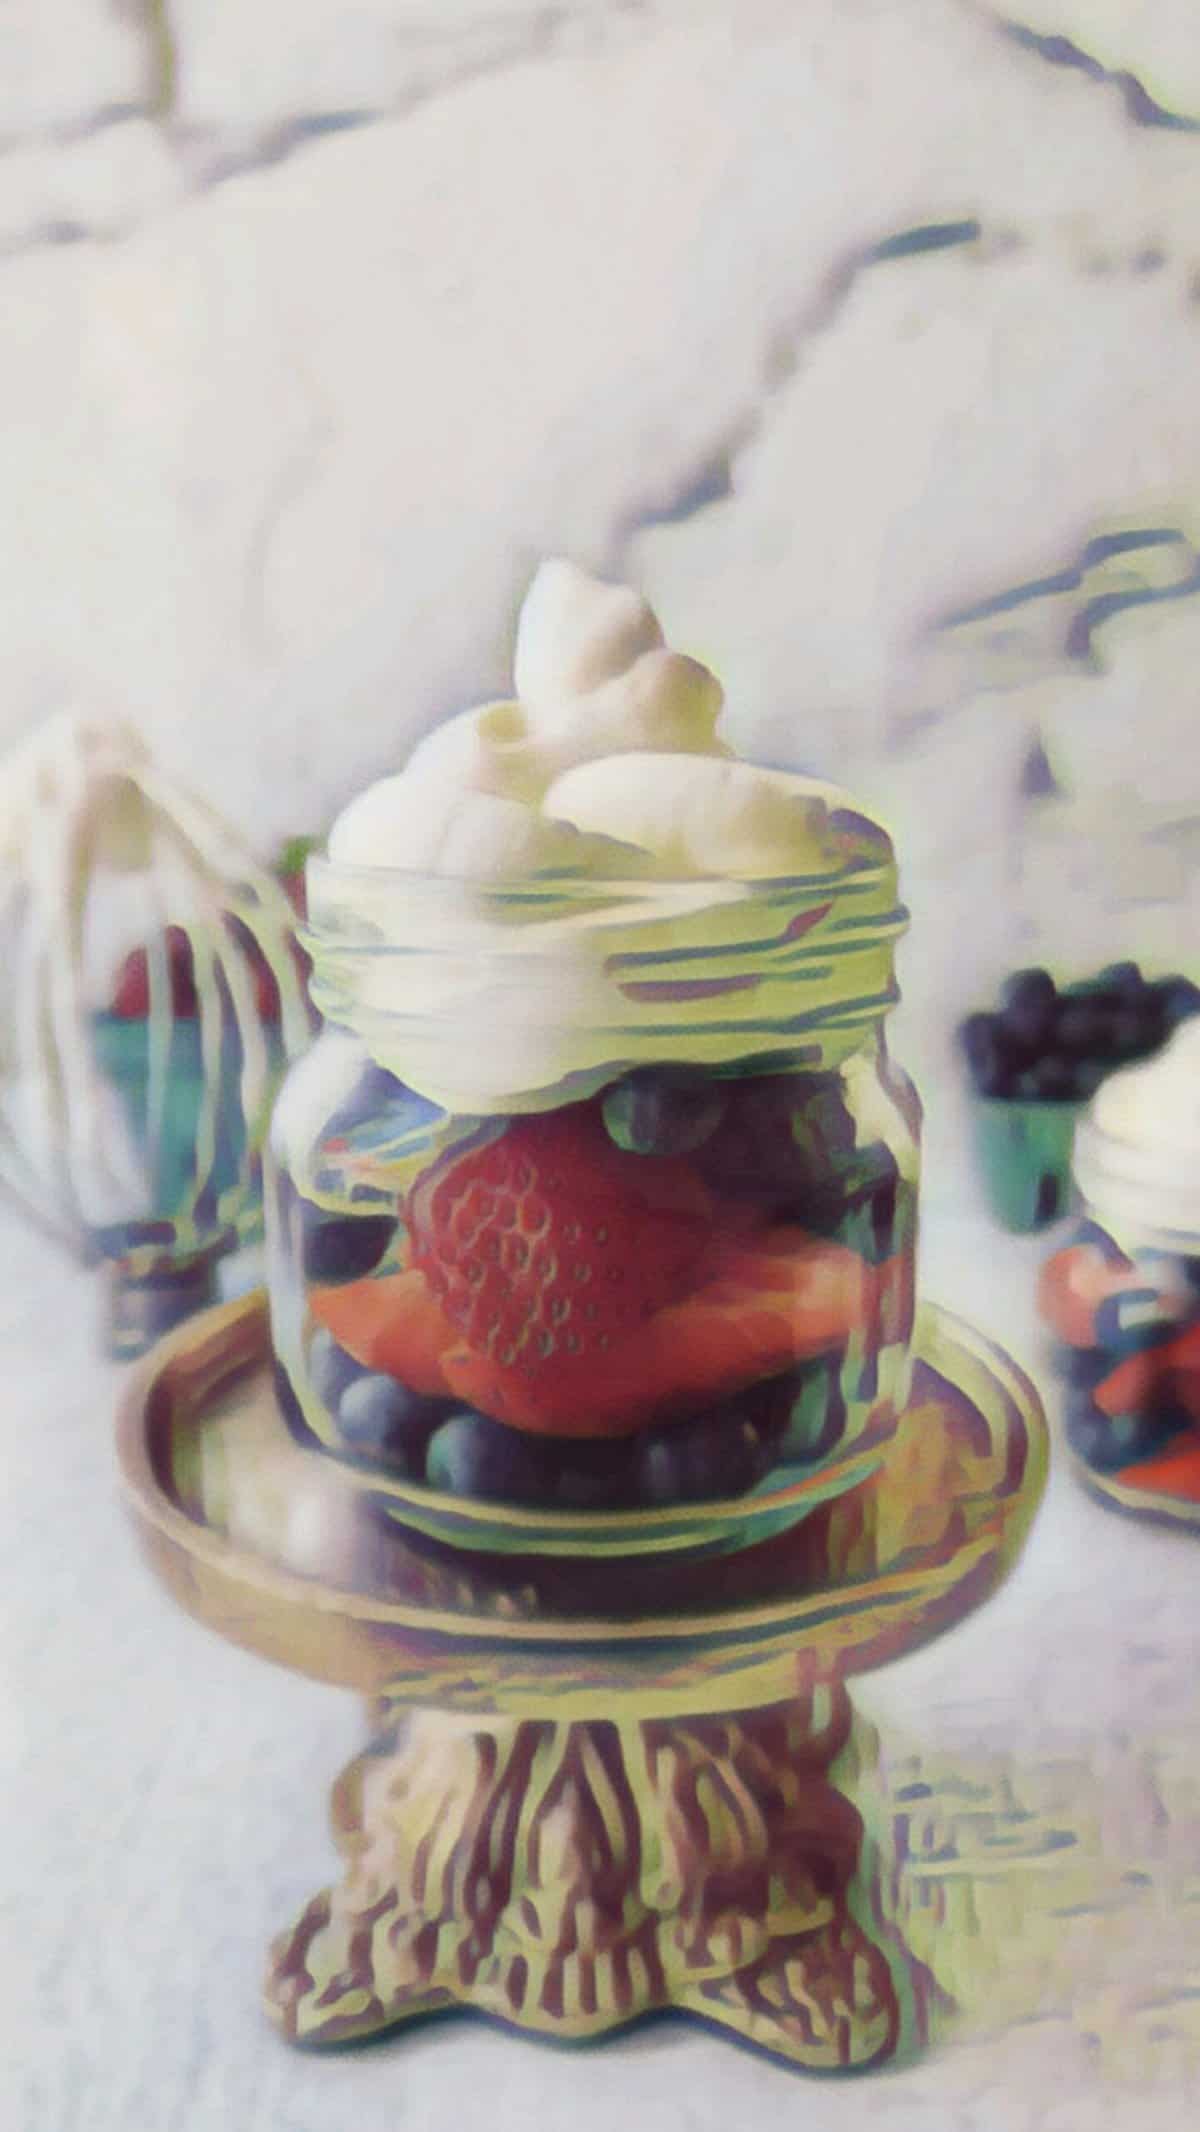 final shot of a small glass with berries and fresh whipped cream on top as an oil painting
